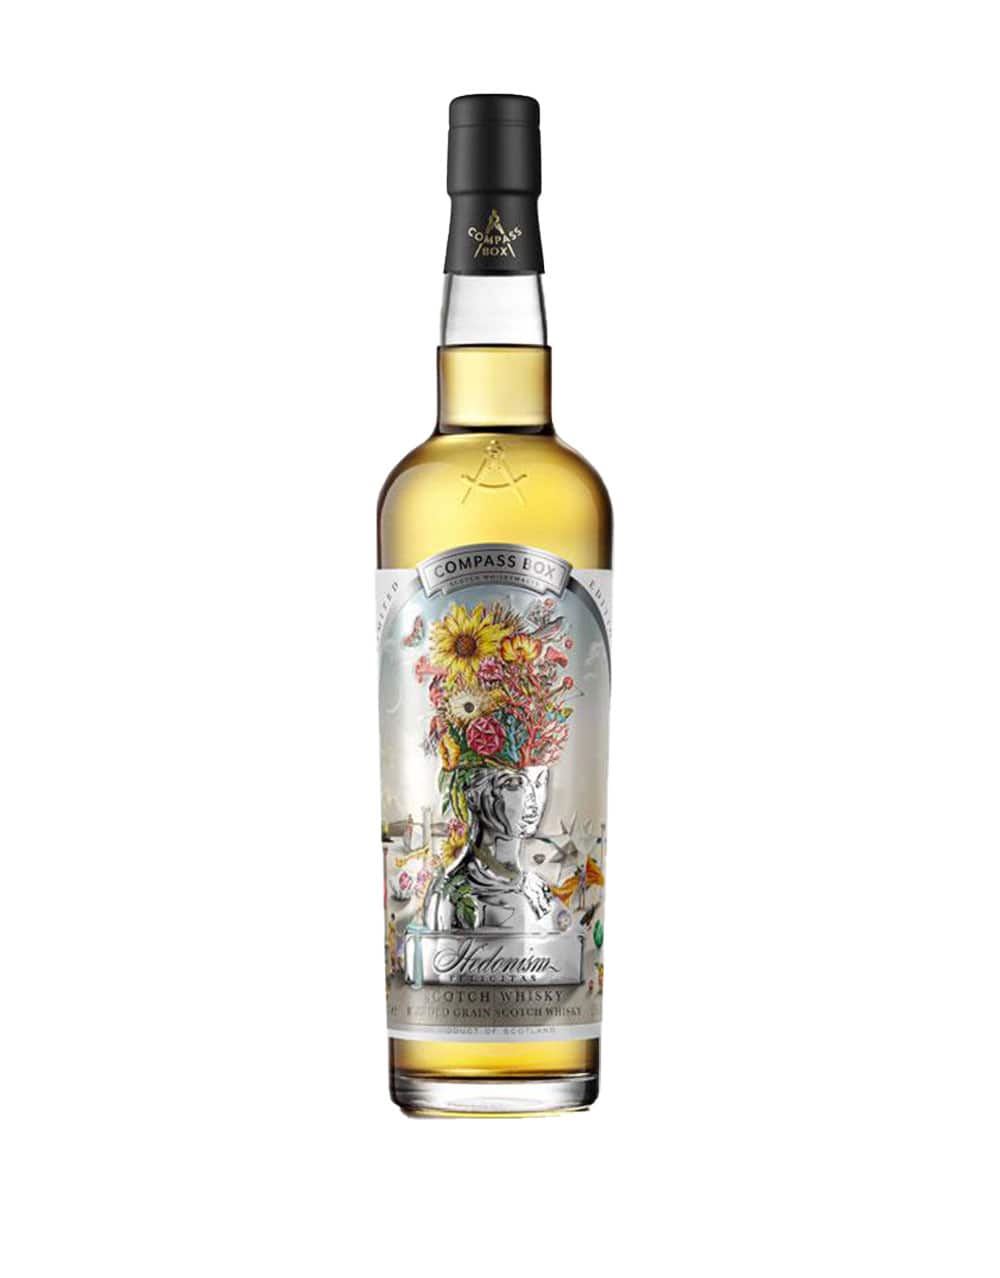 Compass Box 20th Anniversary Blended Scotch Whisky